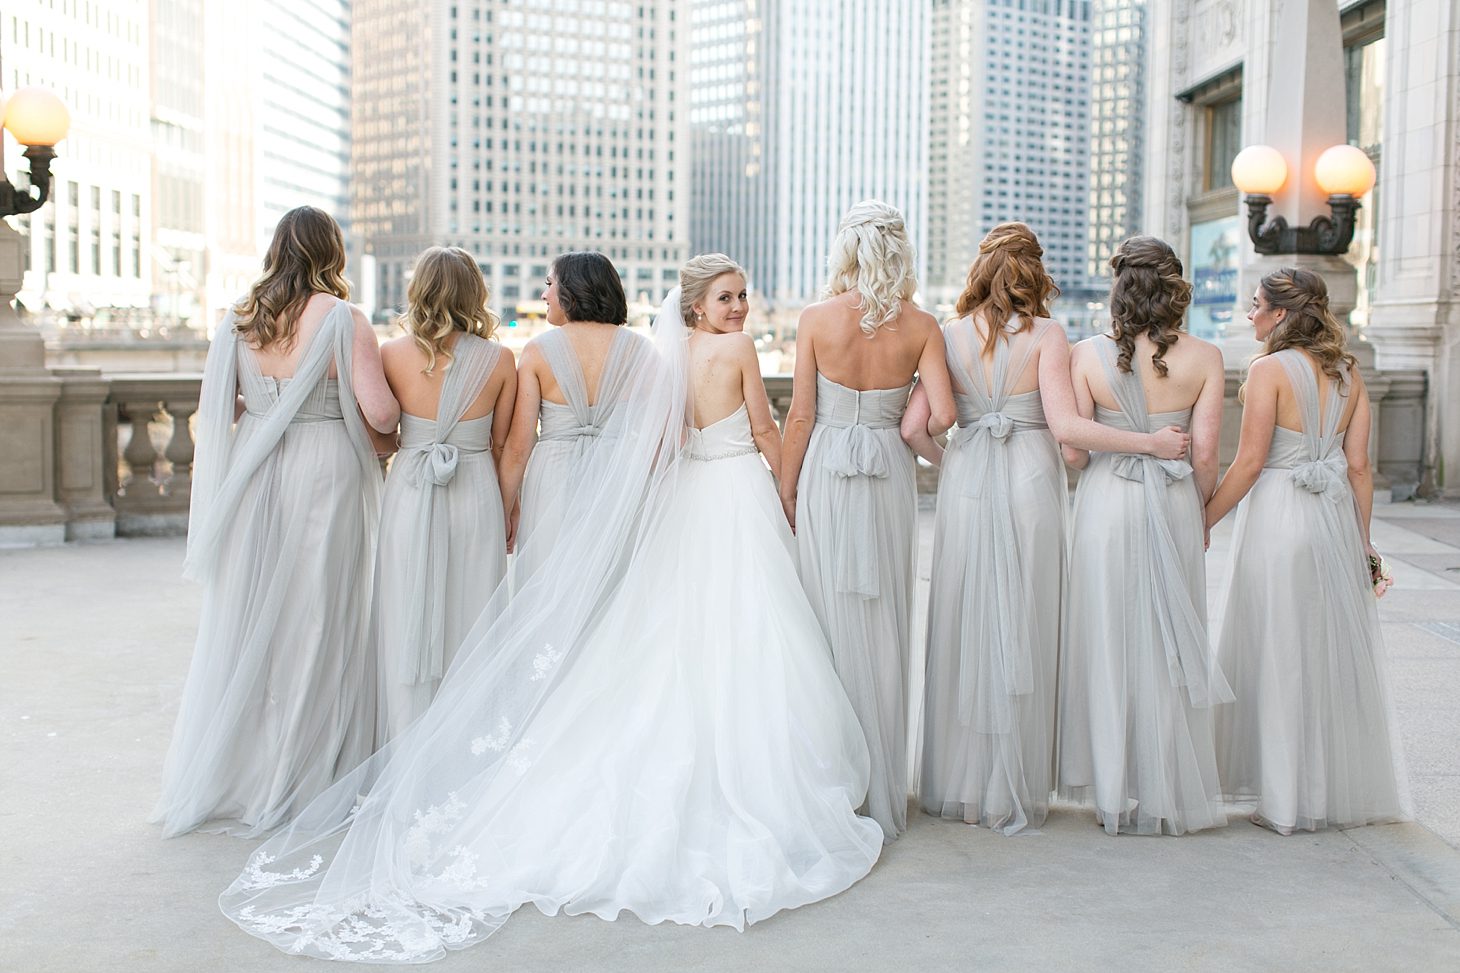 University Club of Chicago Wedding by Christy Tyler Photography_0002